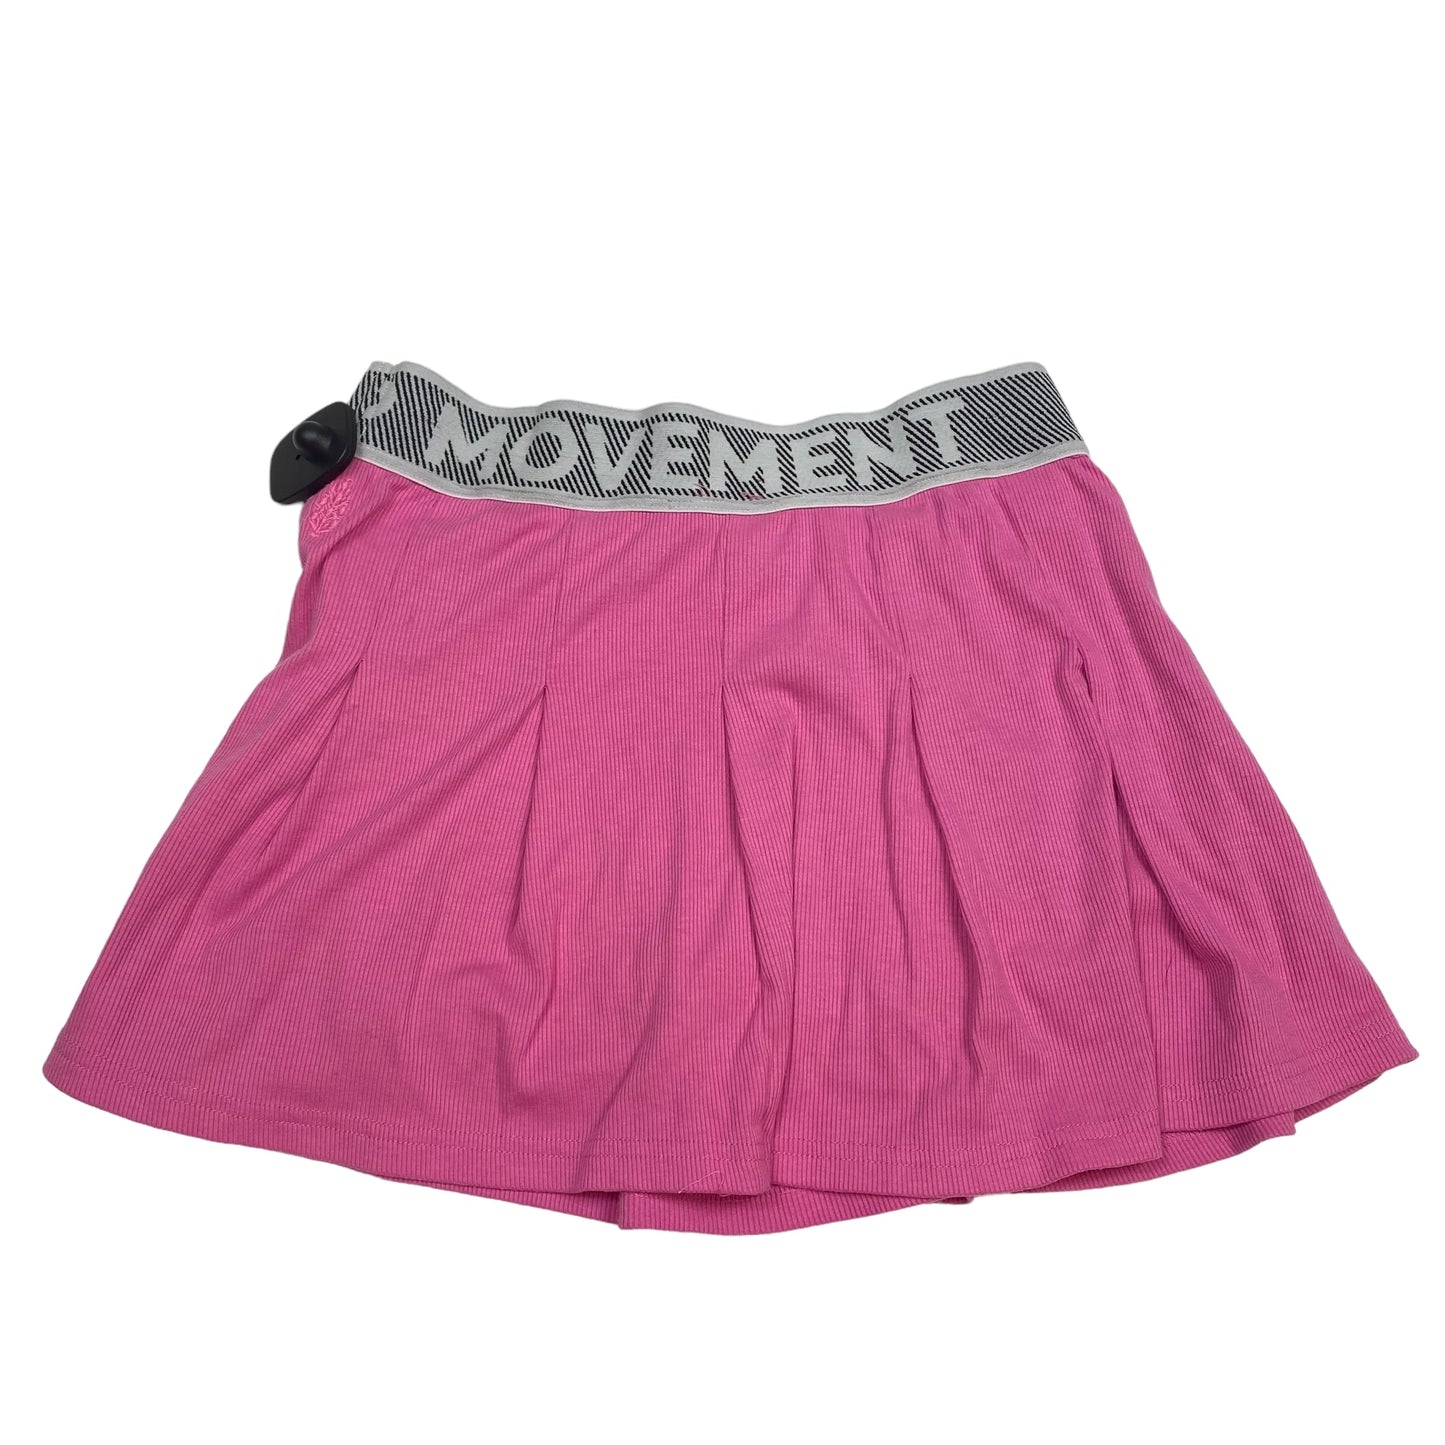 Pink Athletic Skirt Free People, Size S